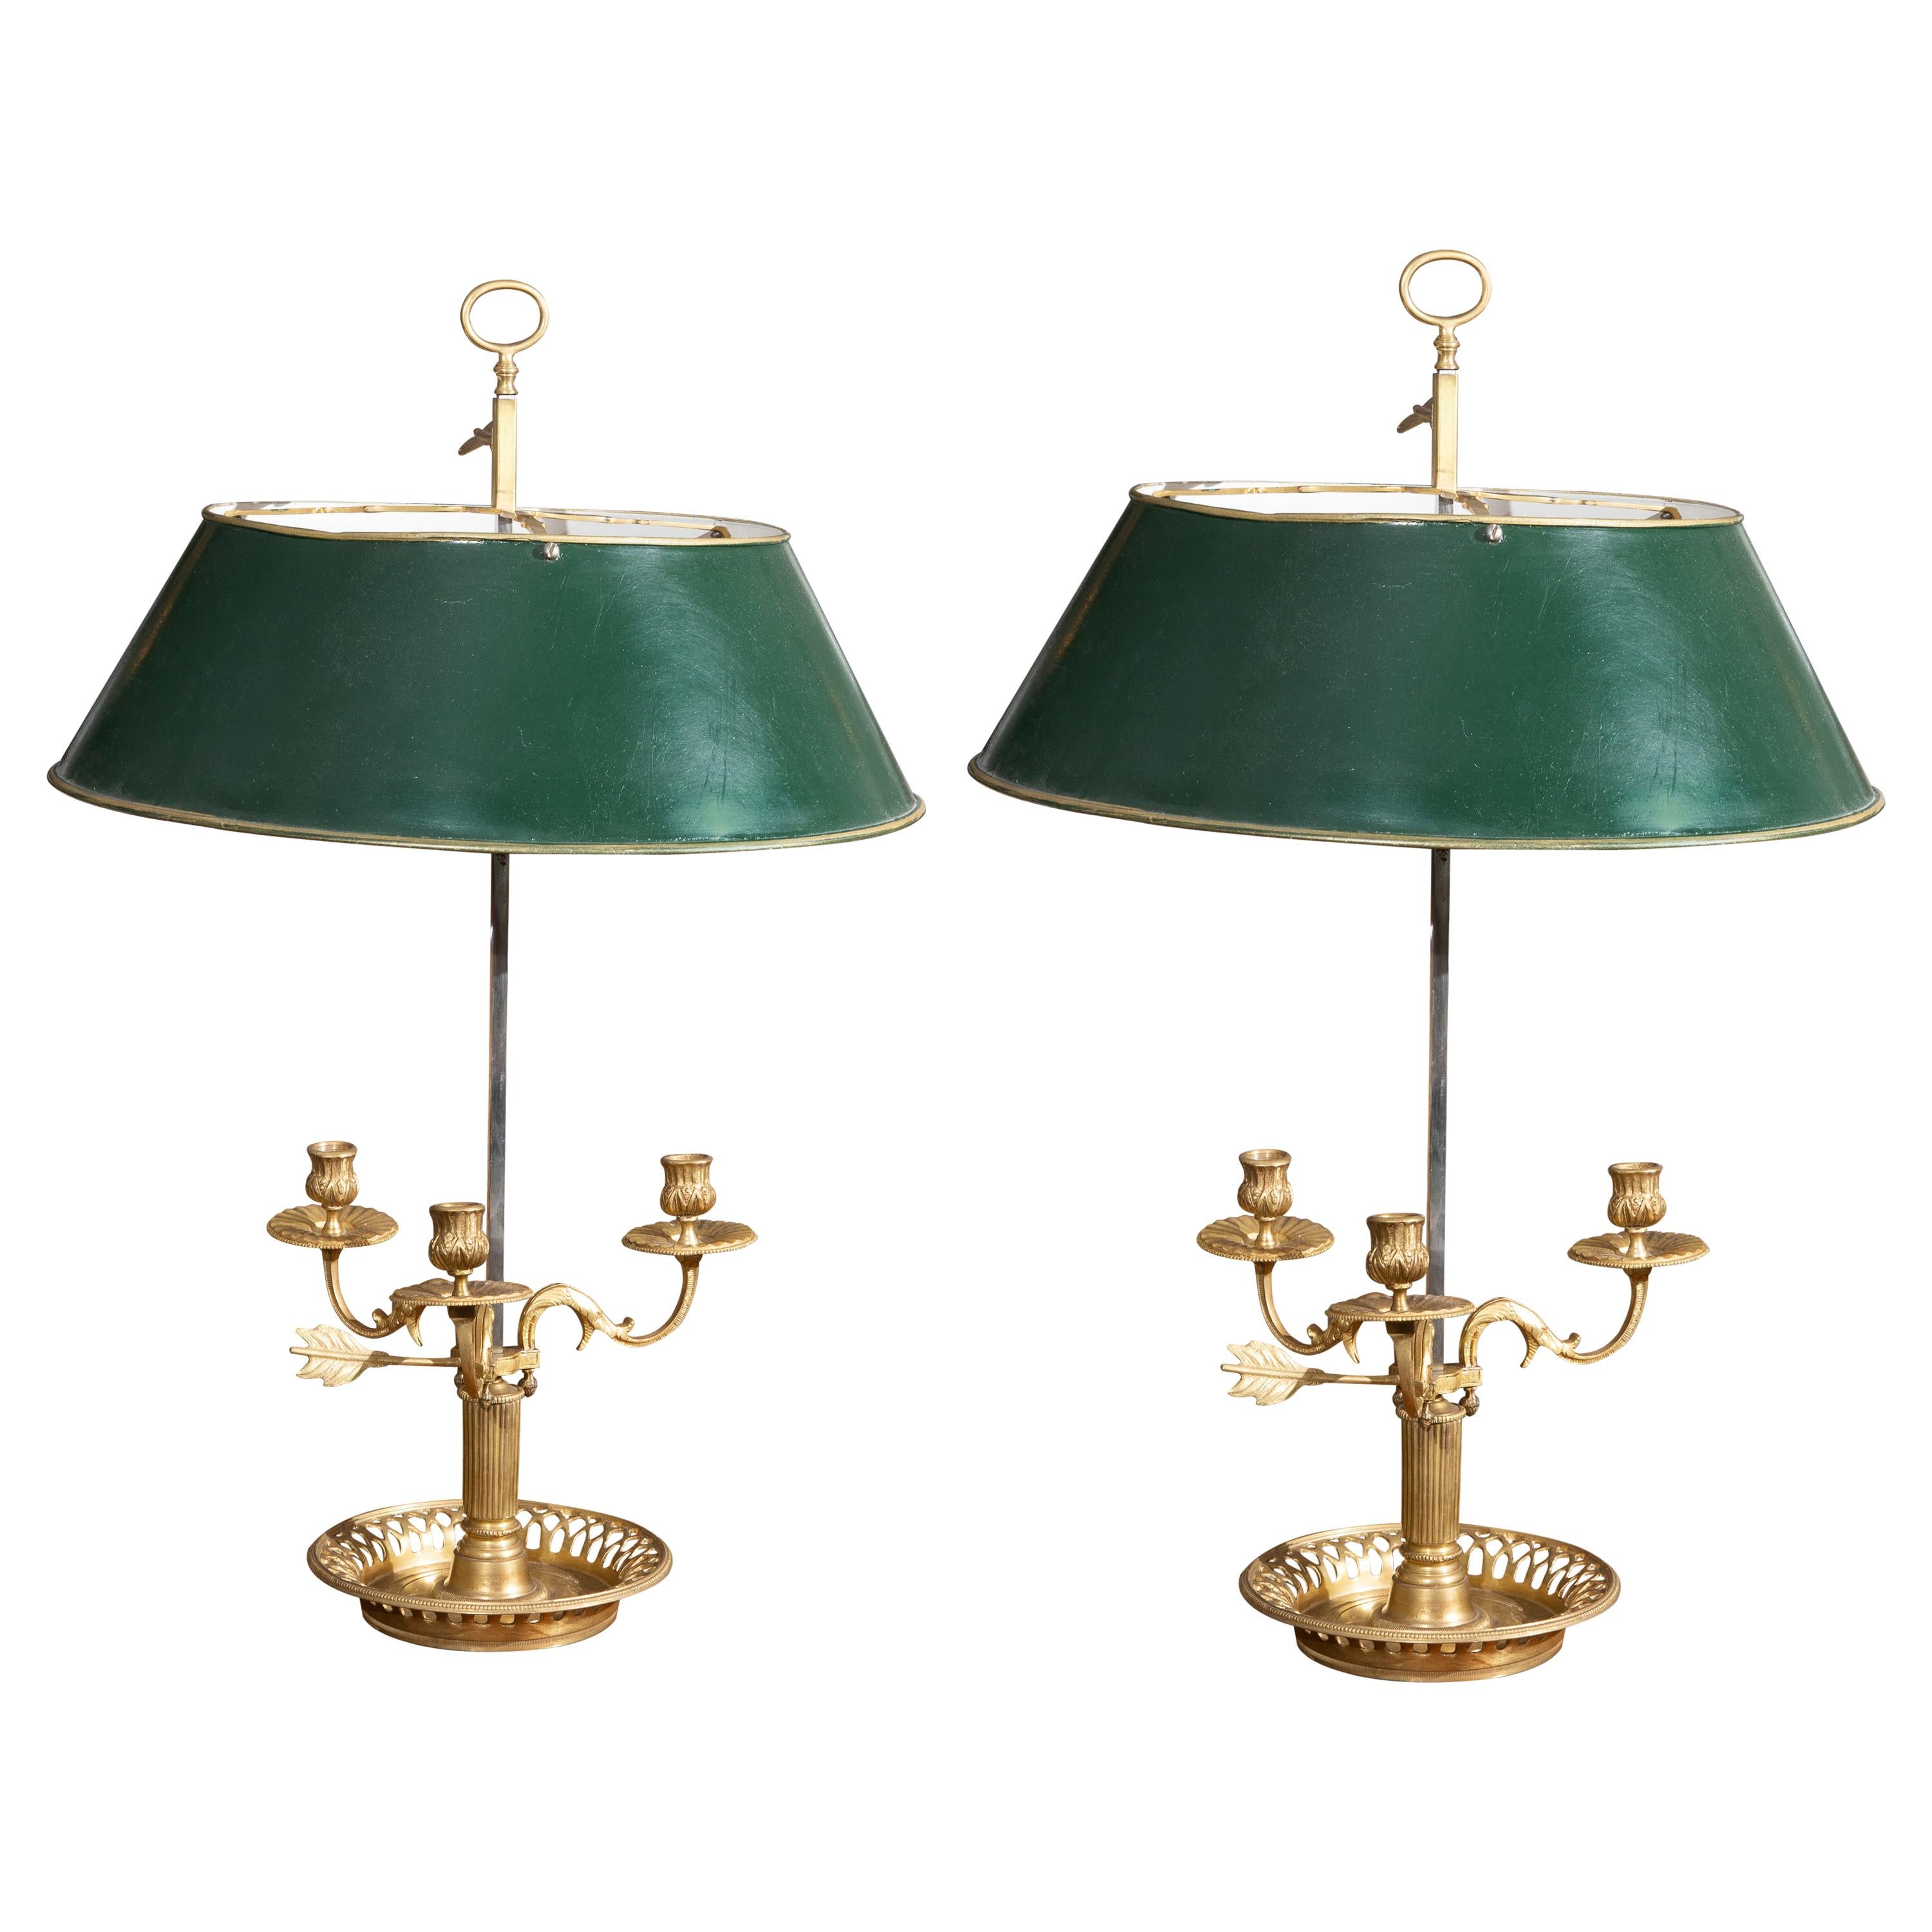 19th Century French Gilt Bronze Bouillotte Lamps with Tole Shades